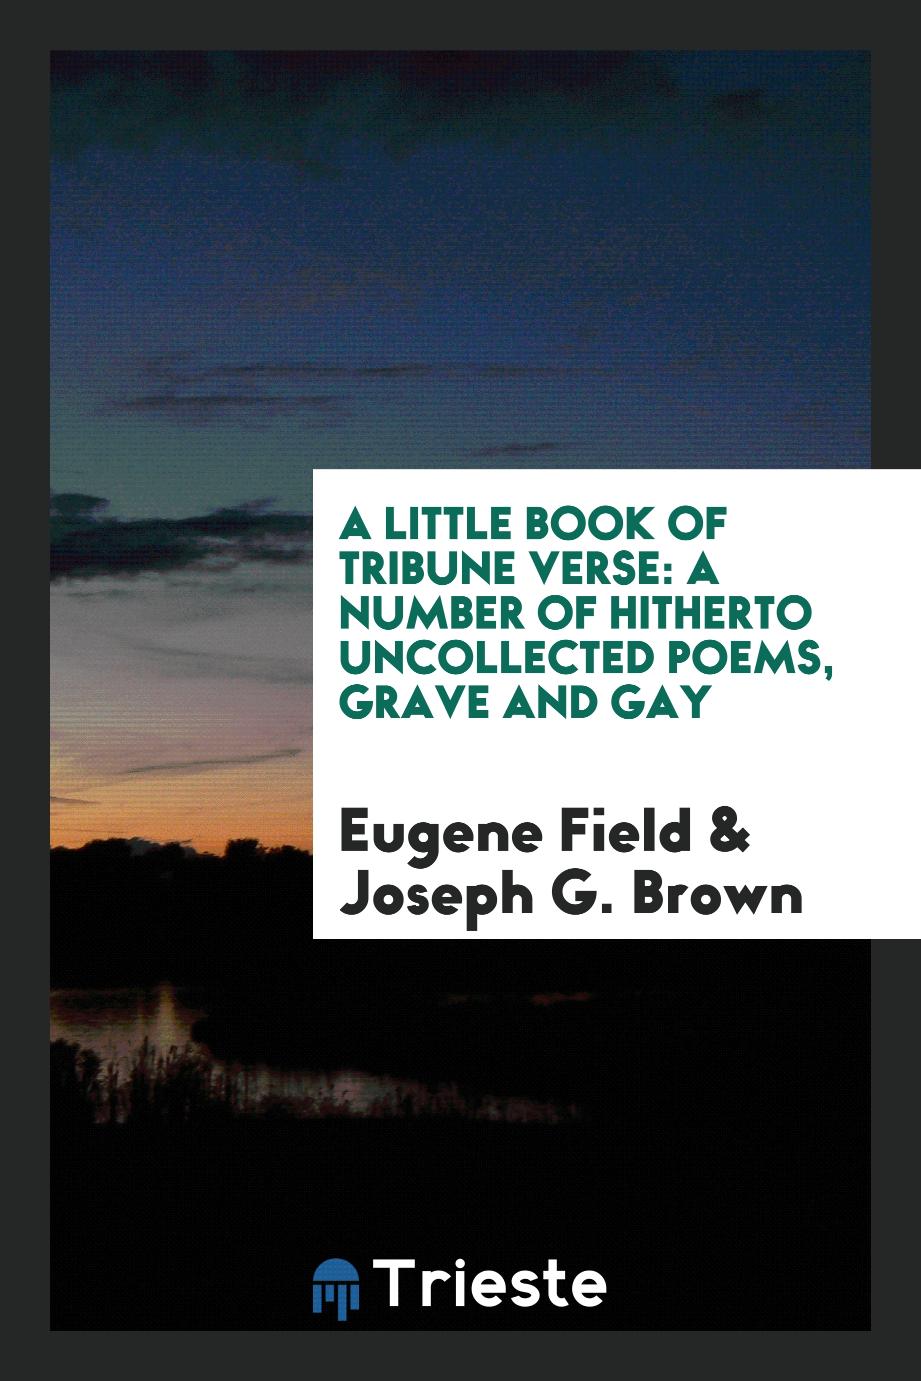 A Little Book of Tribune Verse: A Number of Hitherto Uncollected Poems, Grave and Gay